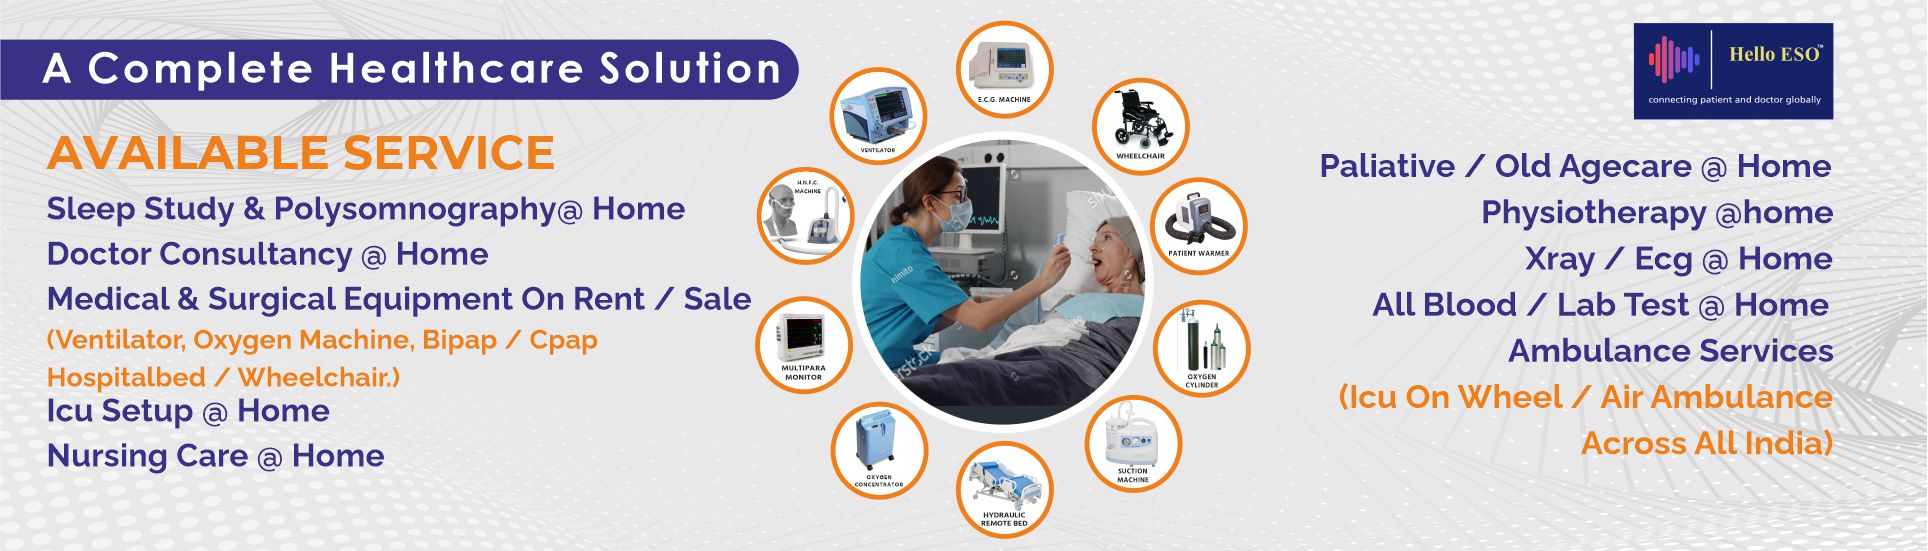 A Complete Healthcare Solution